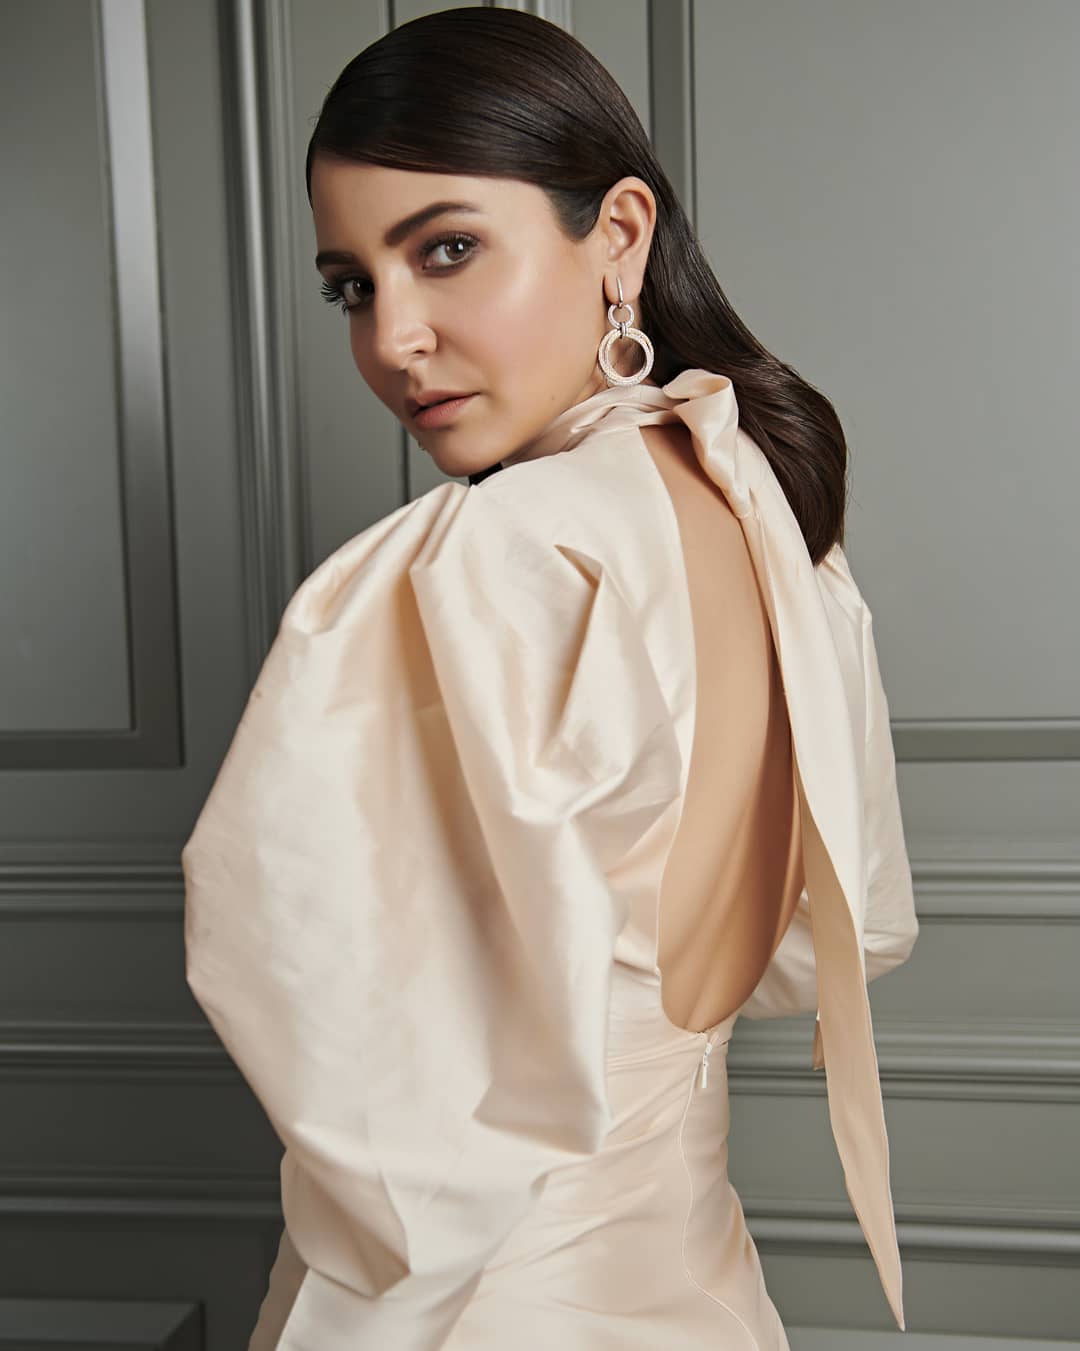 In off white deep neck dress anushka is giving the side pose - Anushka Sharma Hairstyles